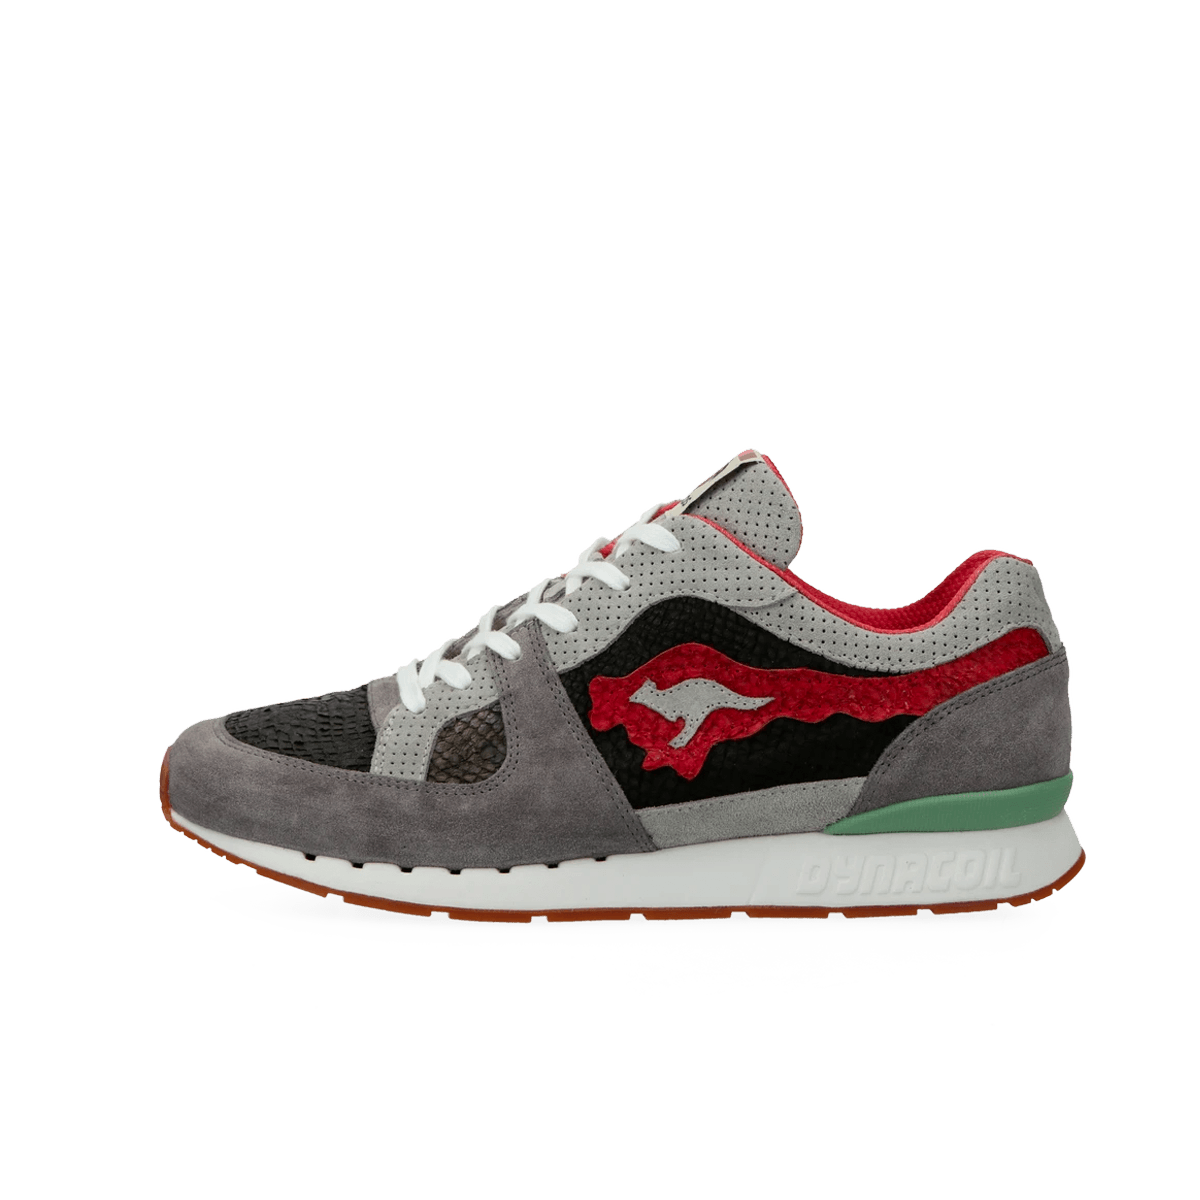 BISSO x KangaROOS Coil-R1 'Rainbow Trout II'